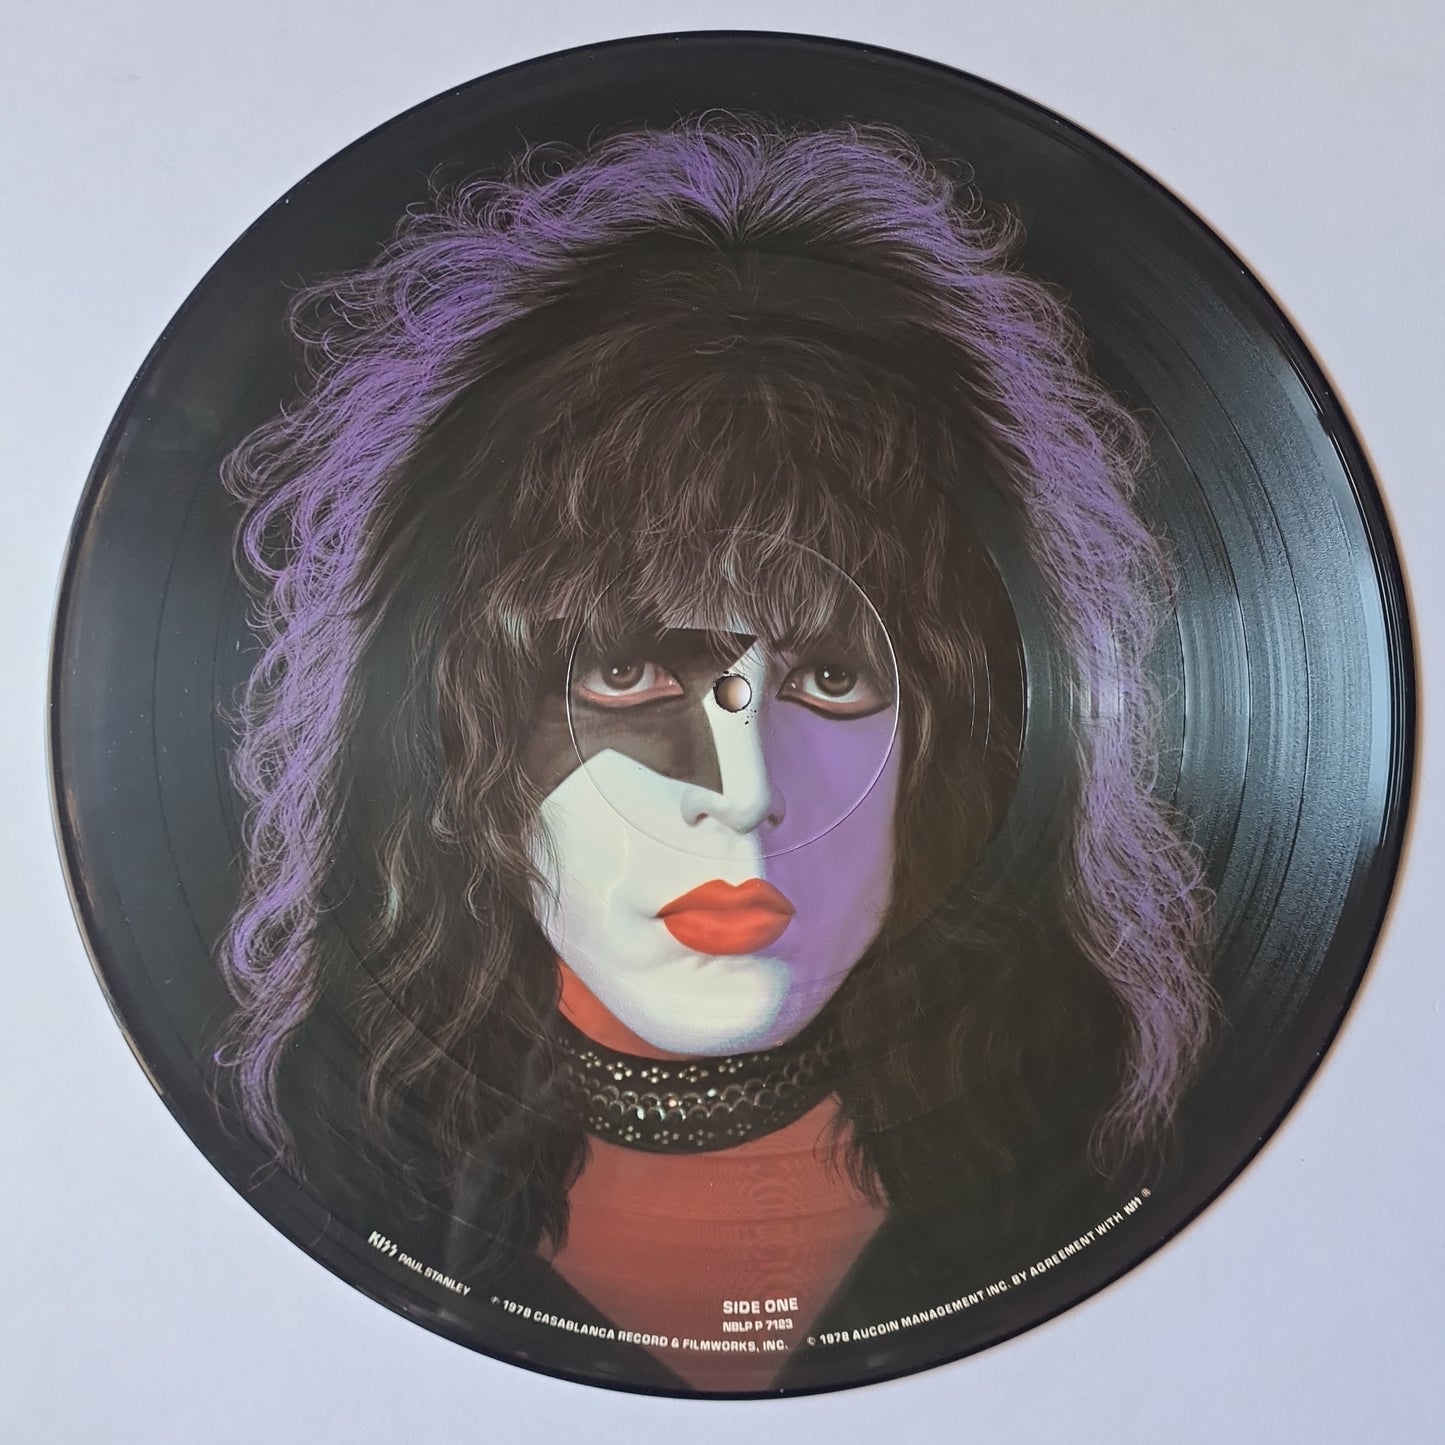 KISS – Paul Stanley - 1978 (USA Picture Disc) - Vinyl Record